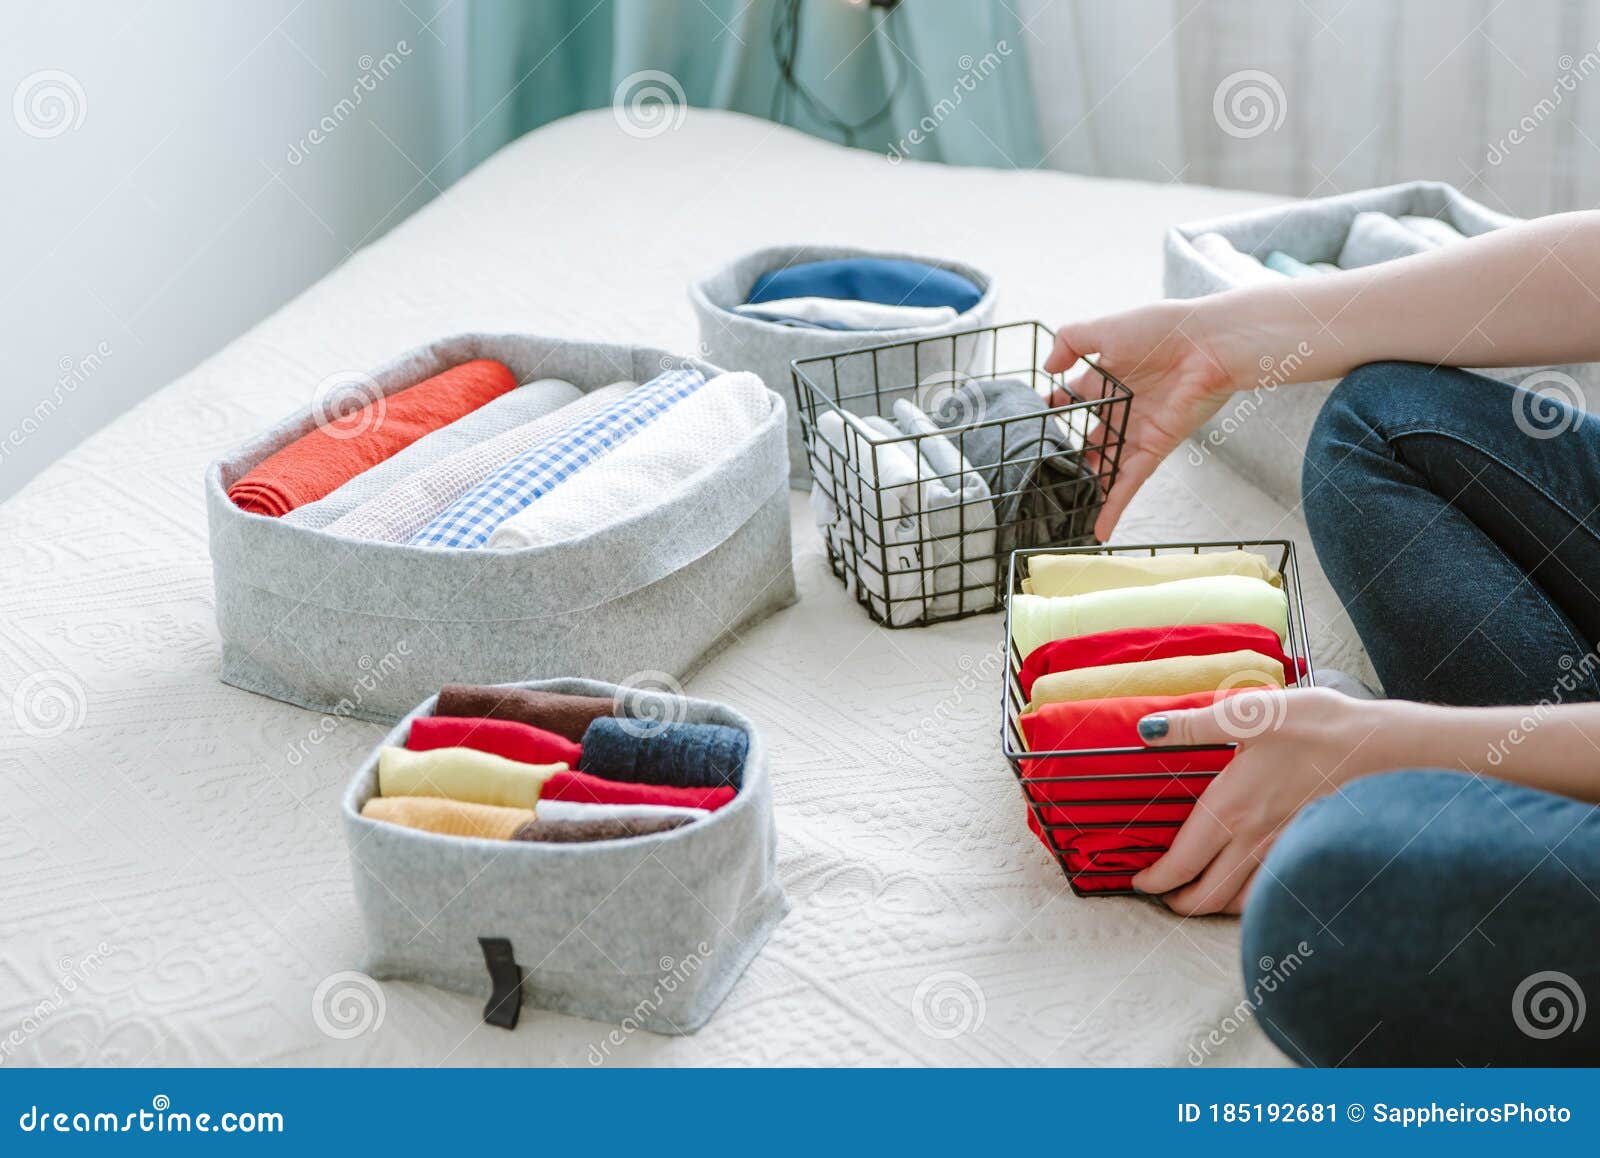 woman folding clothes, organizing stuff and laundry in boxes